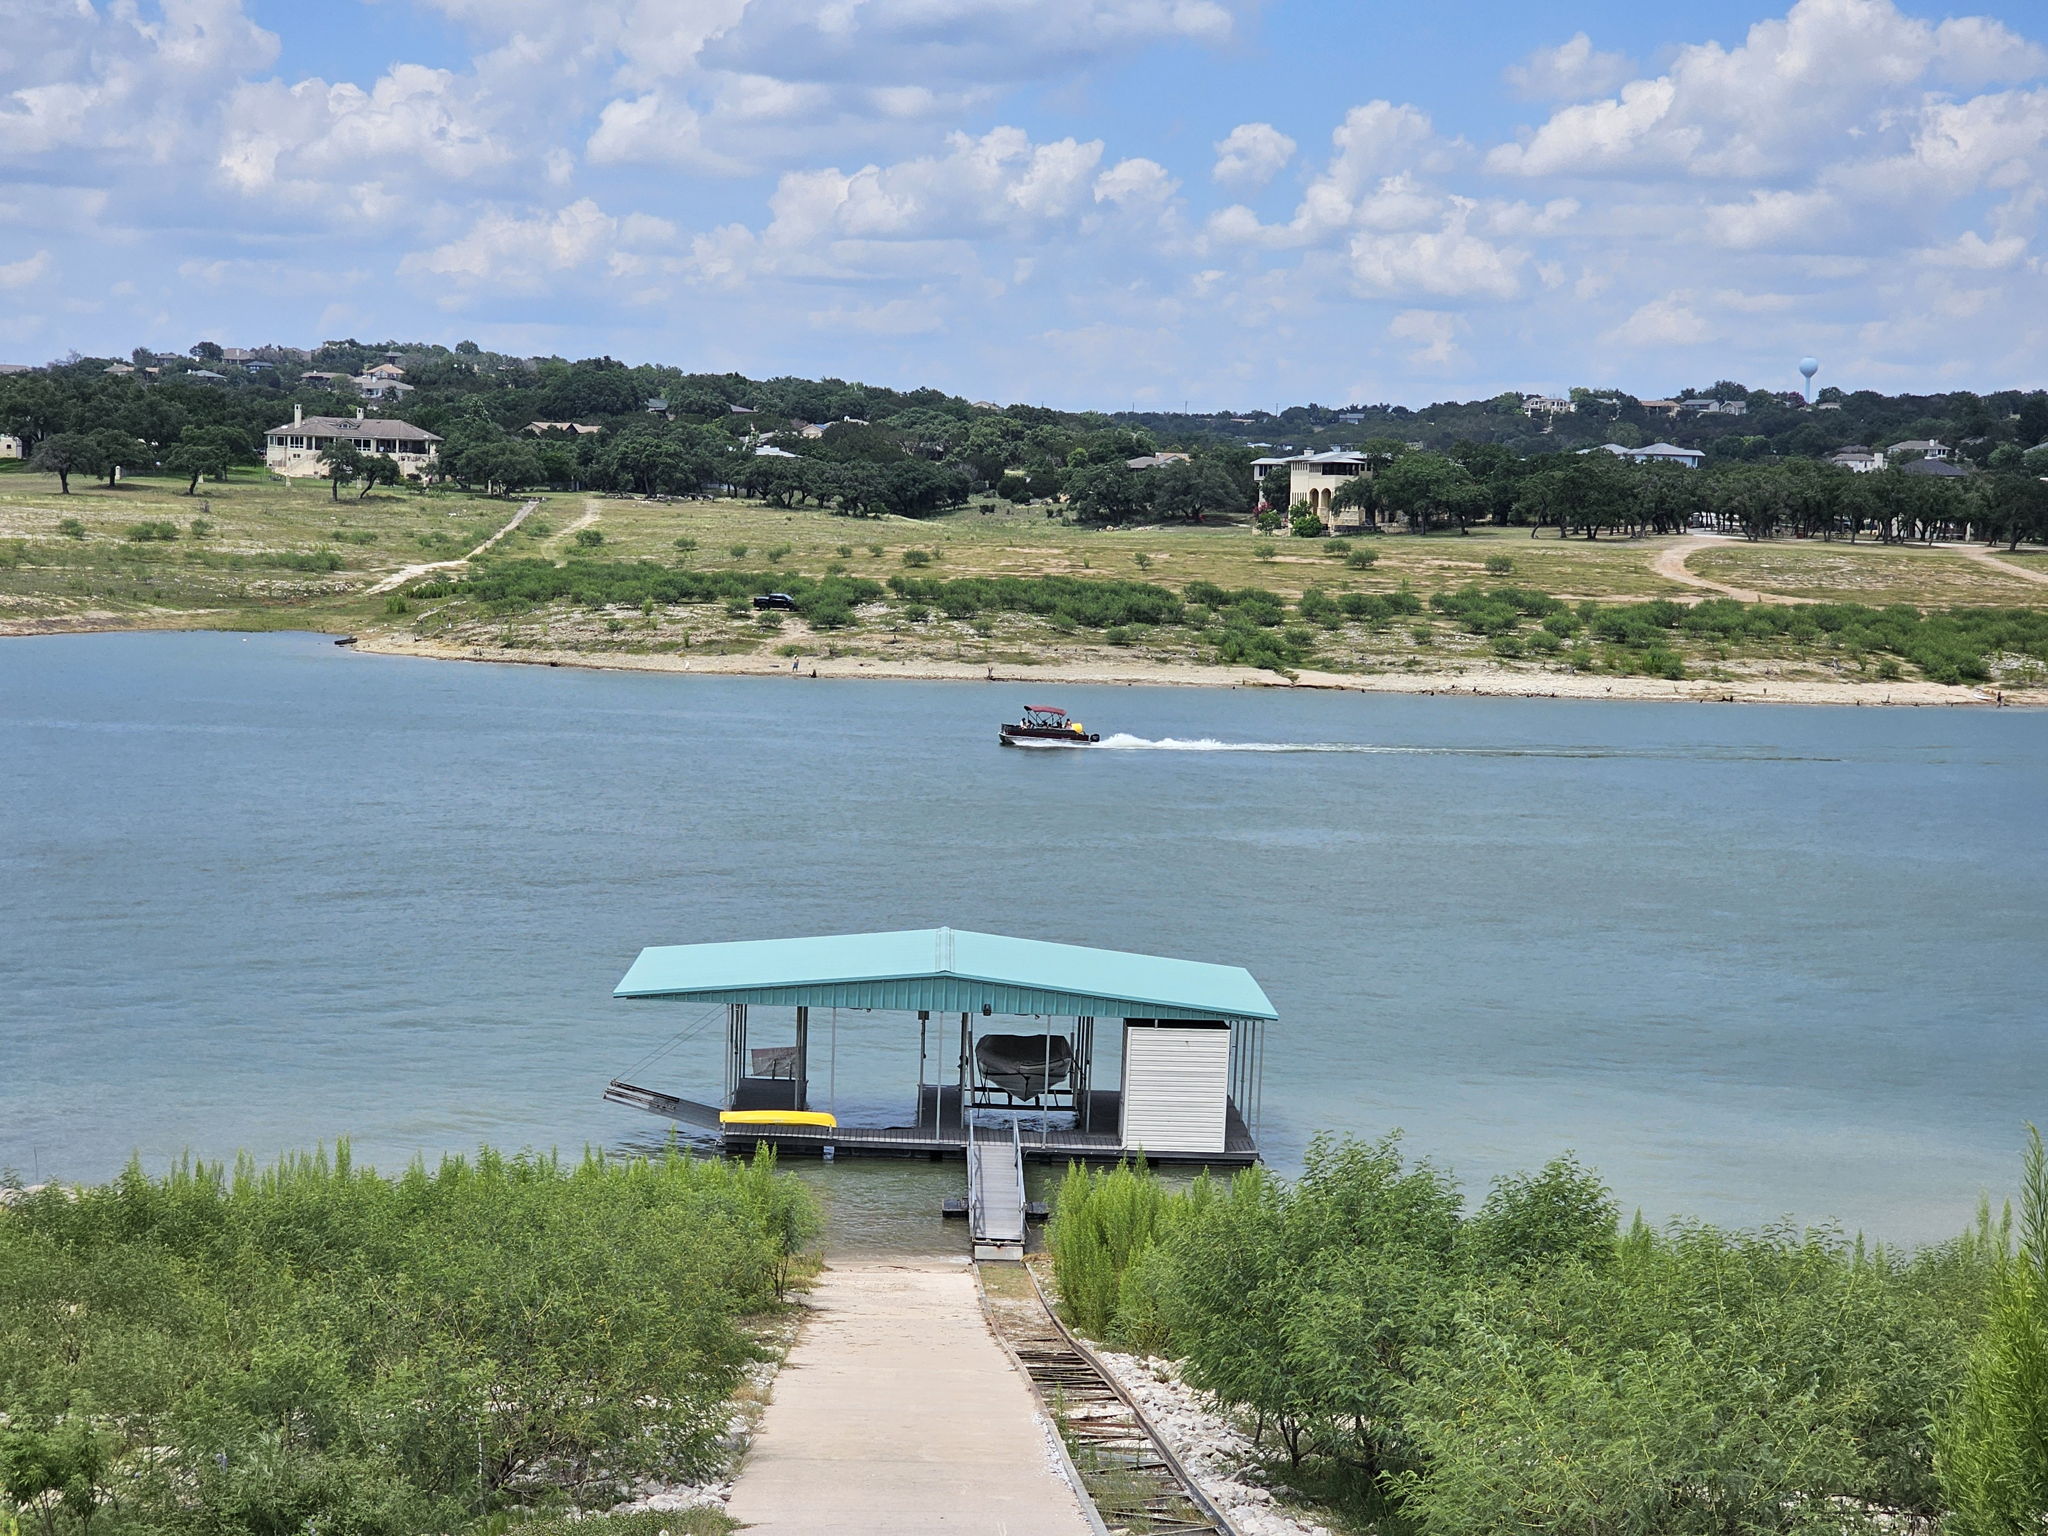 Easy Access to Your Private Boat Dock. The boat dock has 2 slips, jet ski cable lift, 1 swim ladder and storage. The top of the rail system is at about 700 ft elevation. The boat is not included. System allows boat dock to move with various water levels. Photo taken in June.